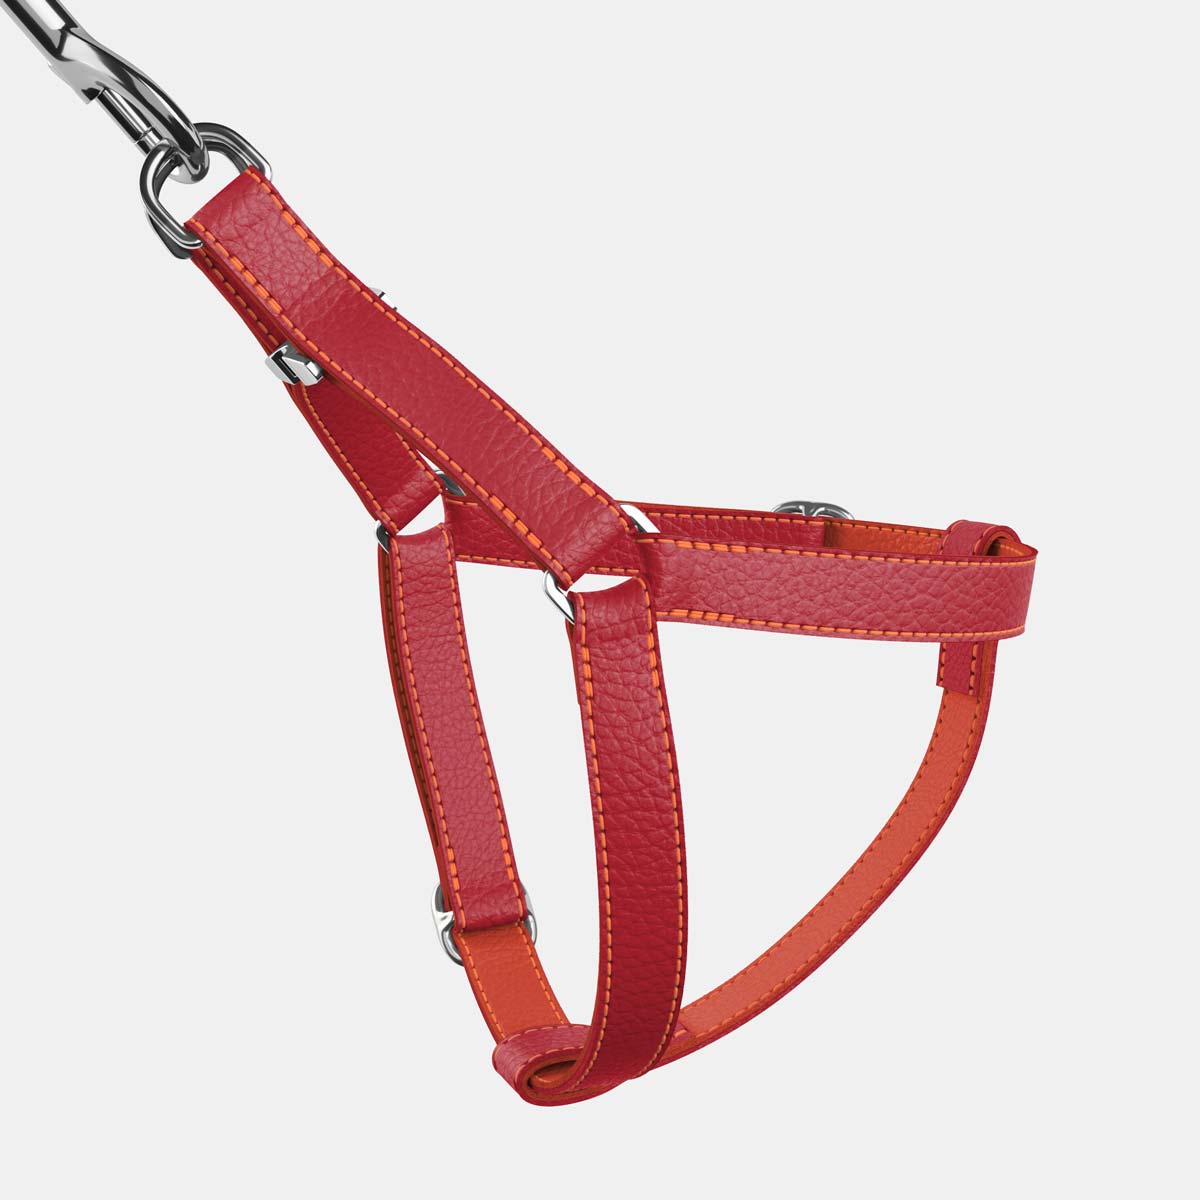 Leather Dog Harness - Red and Coral - RYAN London